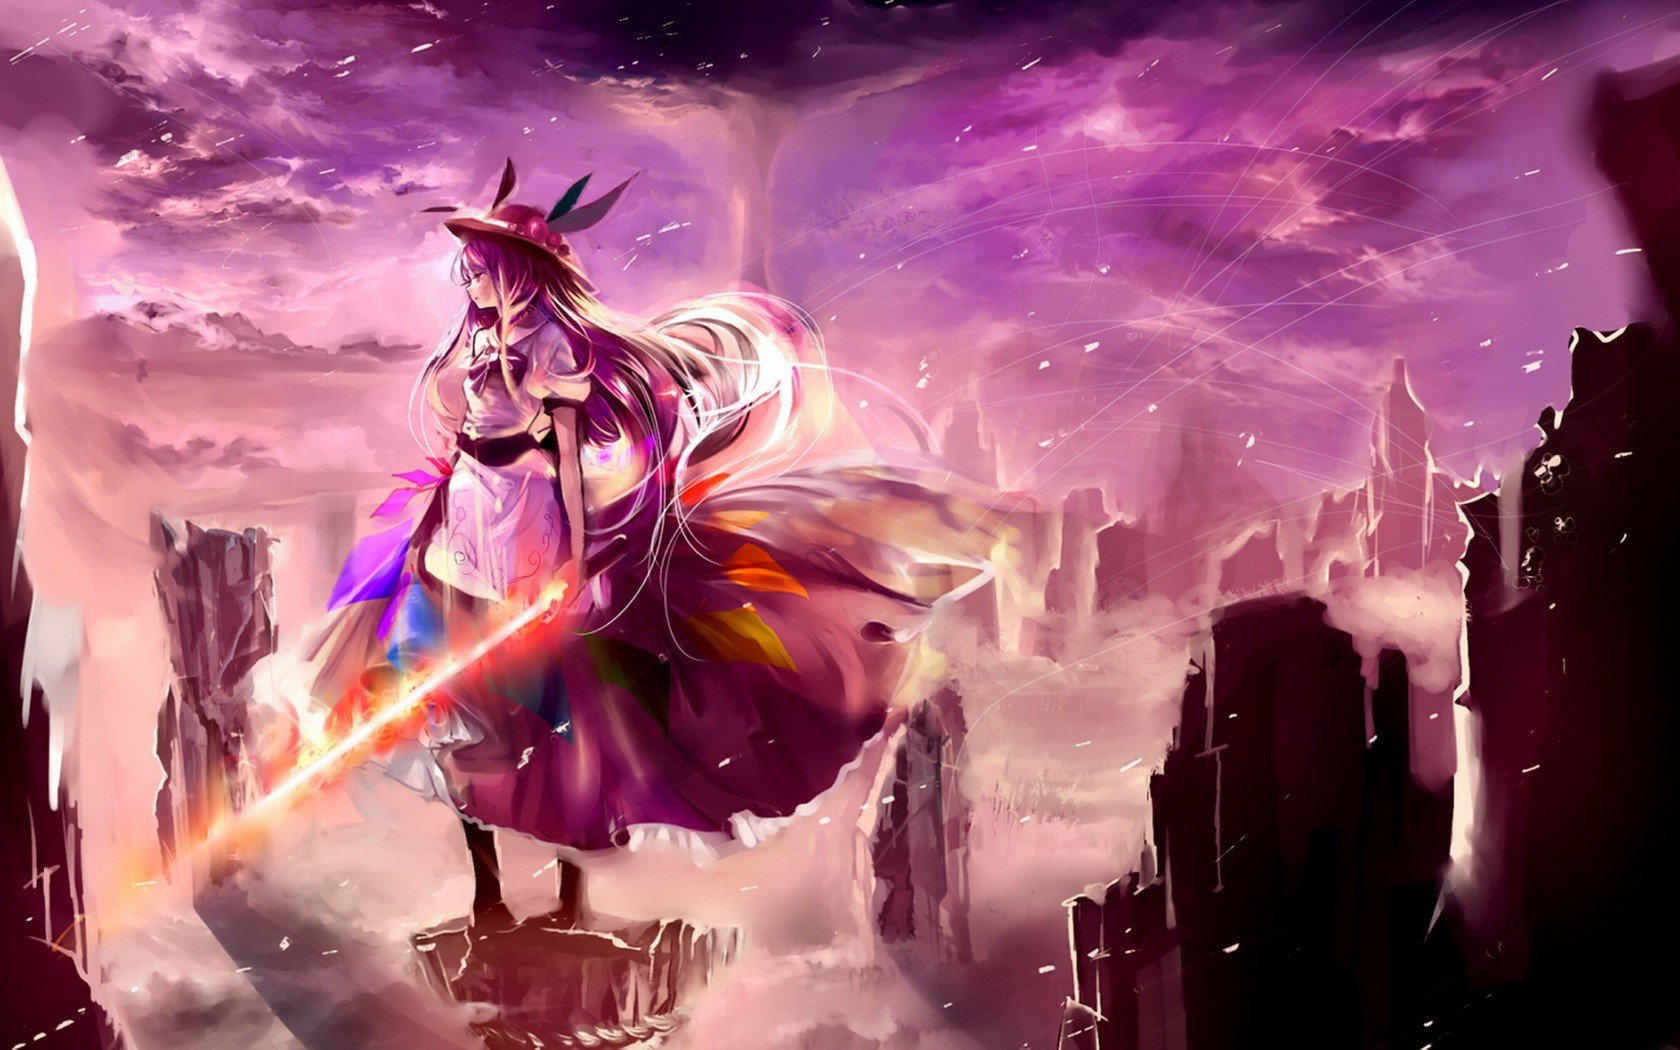 video, Games, Clouds, Landscapes, Touhou, Dress, Purple, Peaches, Rocks, Long, Hair, Fog, Weapons, Purple, Hair, Red, Eyes, Scenic, Aprons, Hinanawi, Tenshi, Skyscapes, Hats, Sword, Of, Hisou, Swords Wallpaper